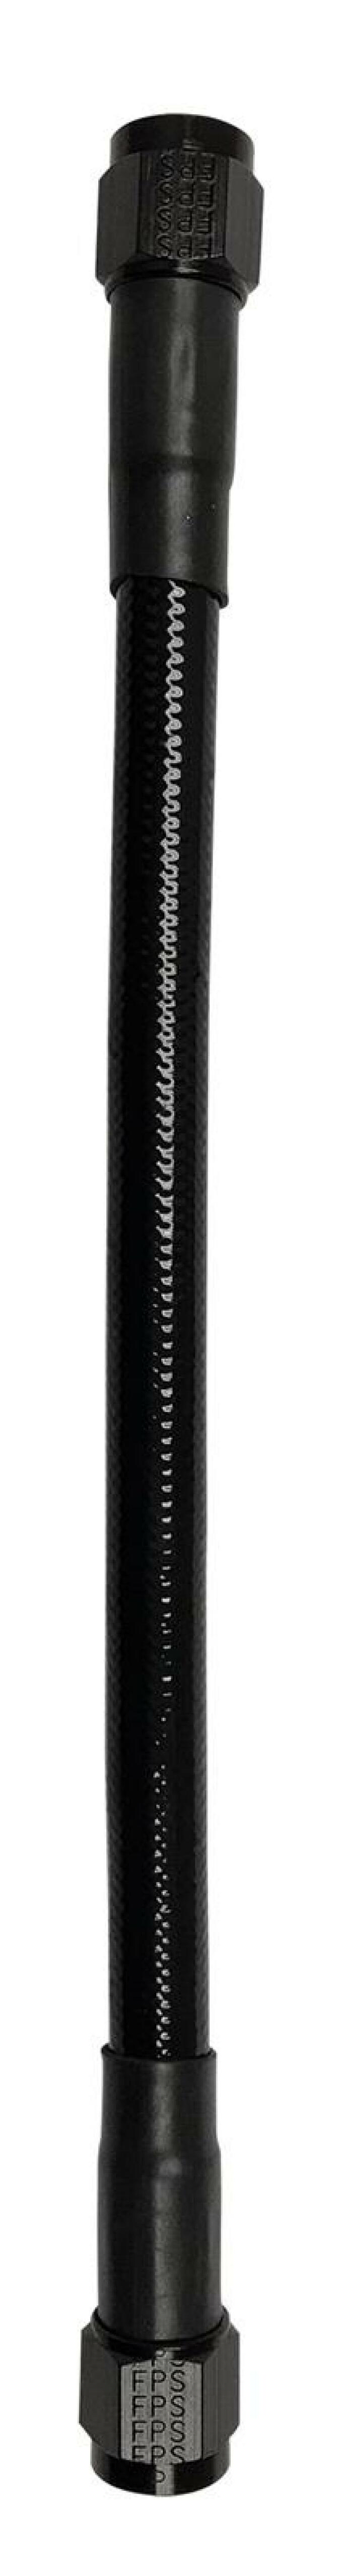 Fragola -10AN Ext Black PTFE Hose Assembly Straight x Straight 96in - 6029-1-1-96BL